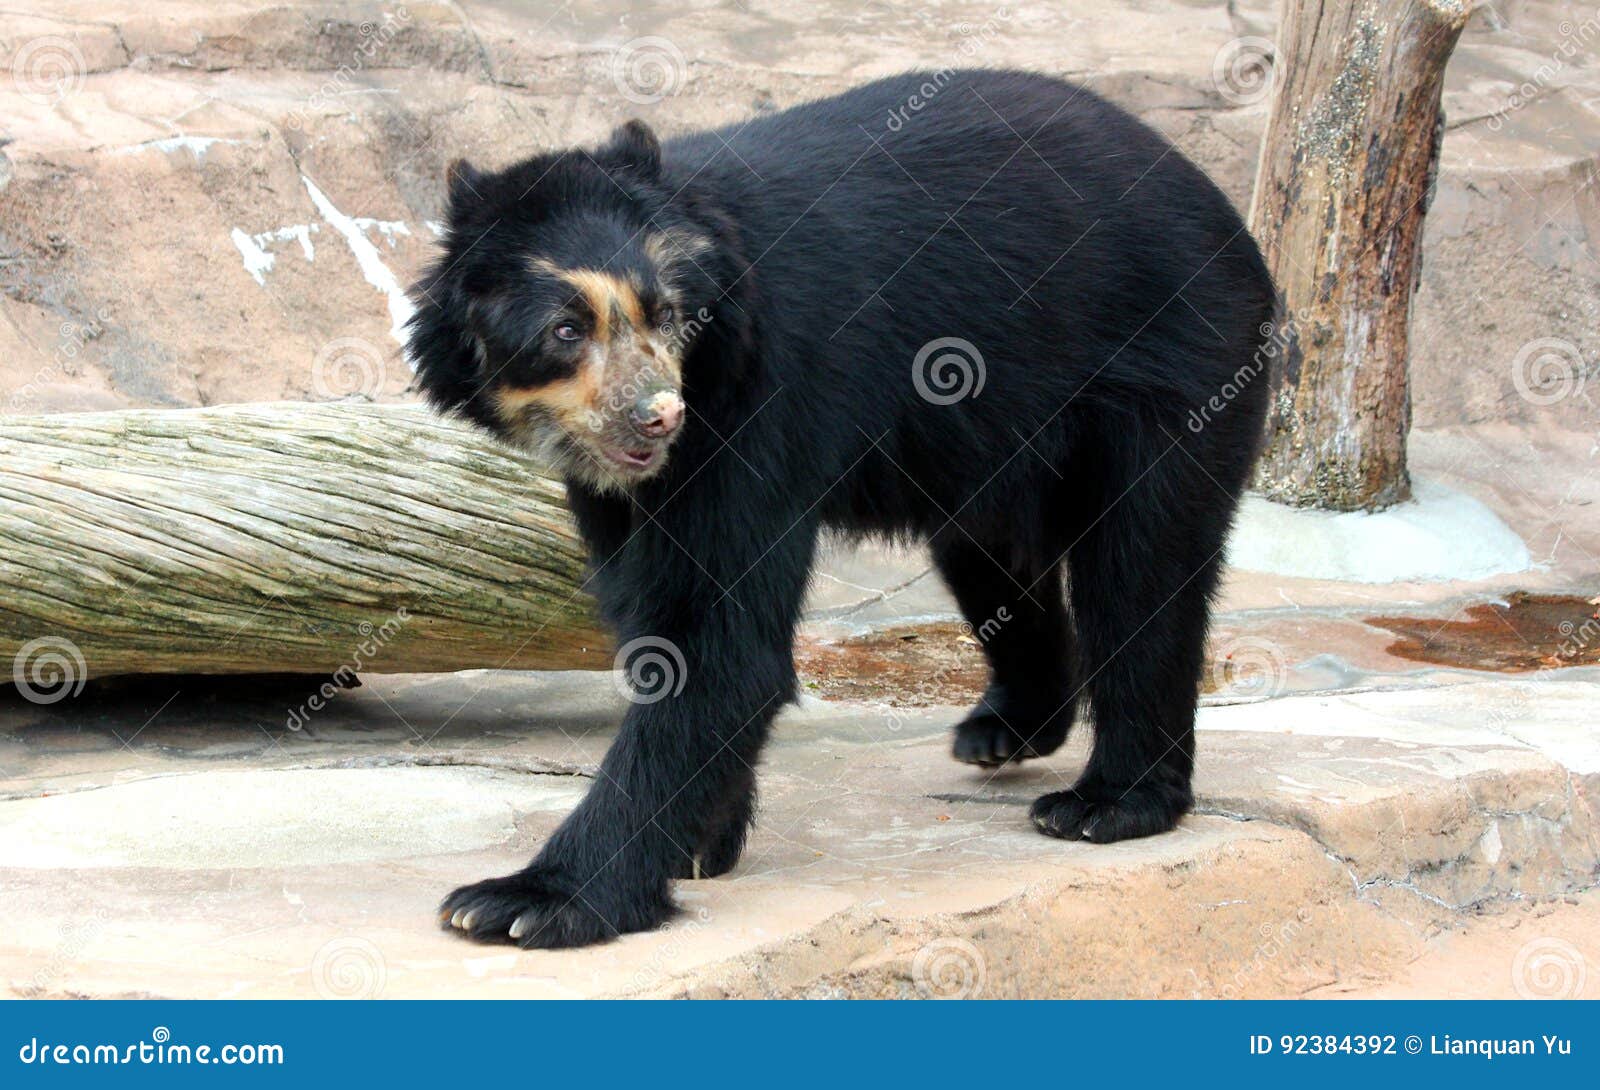 spectacled bear or andean bear is endemic bear to south america